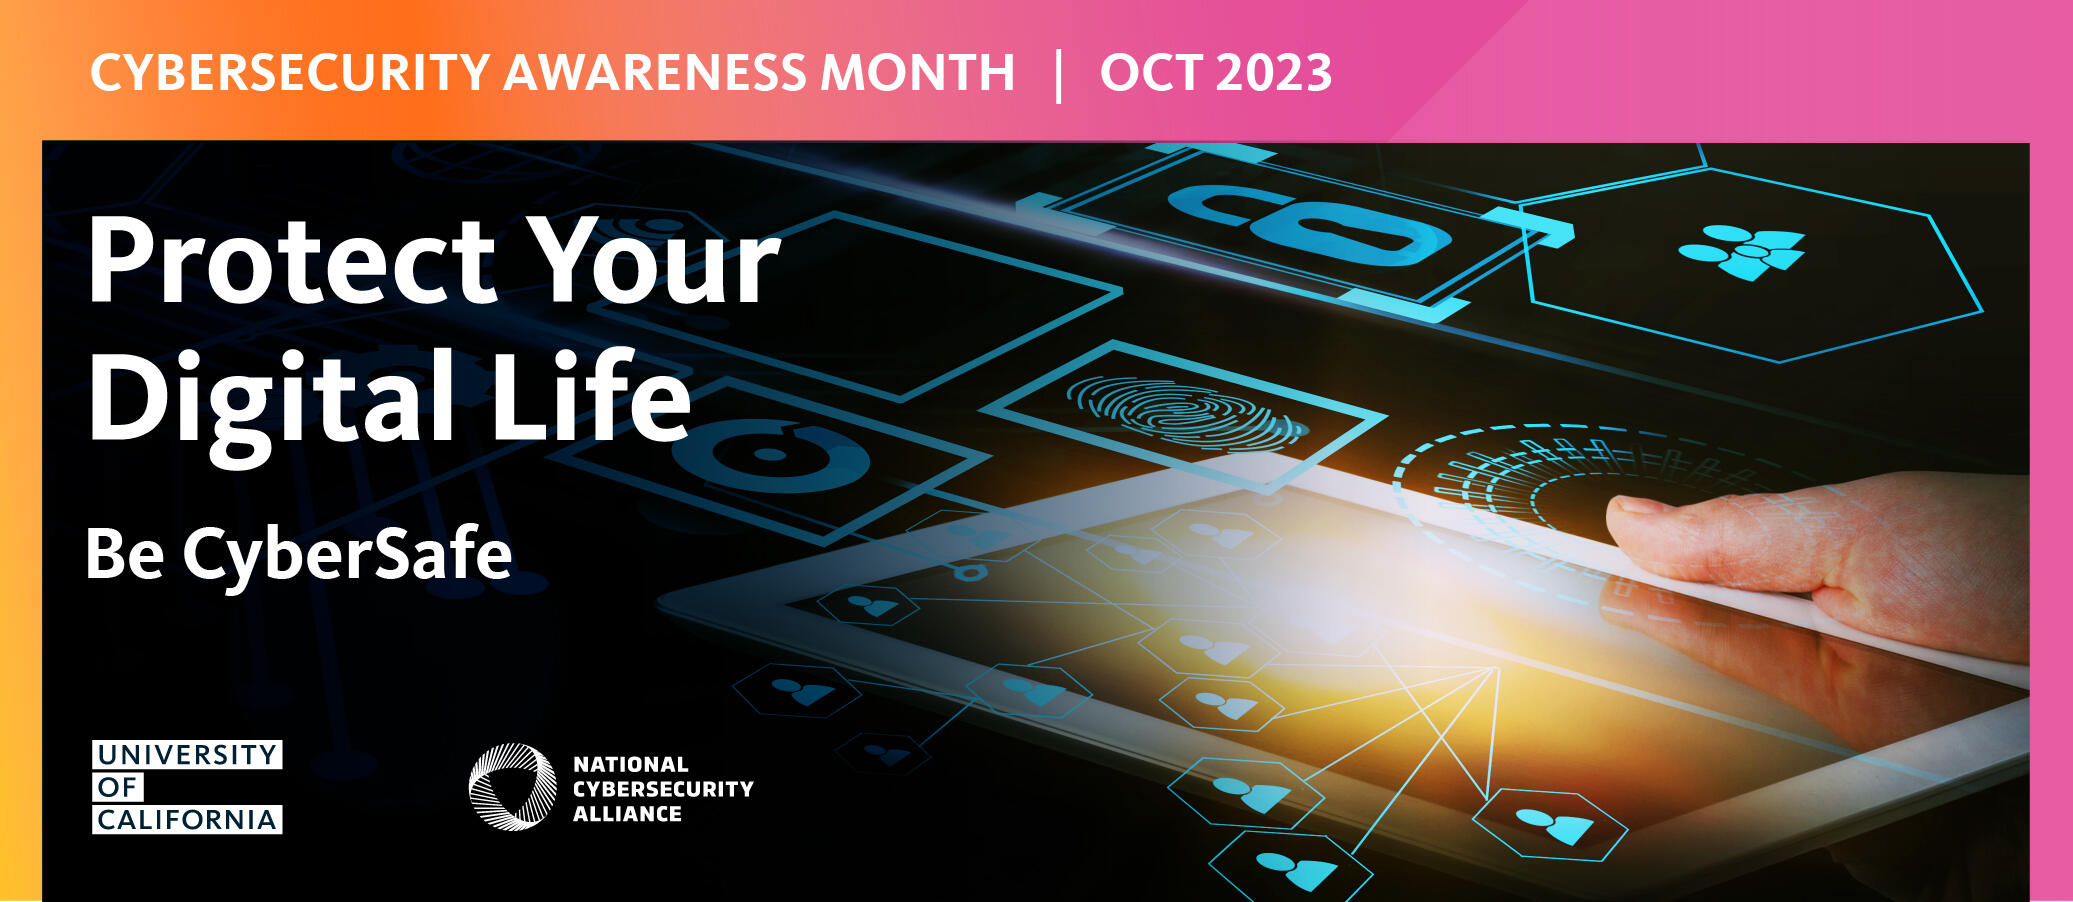 Protect Your Digital Life, Be Cyber Safe